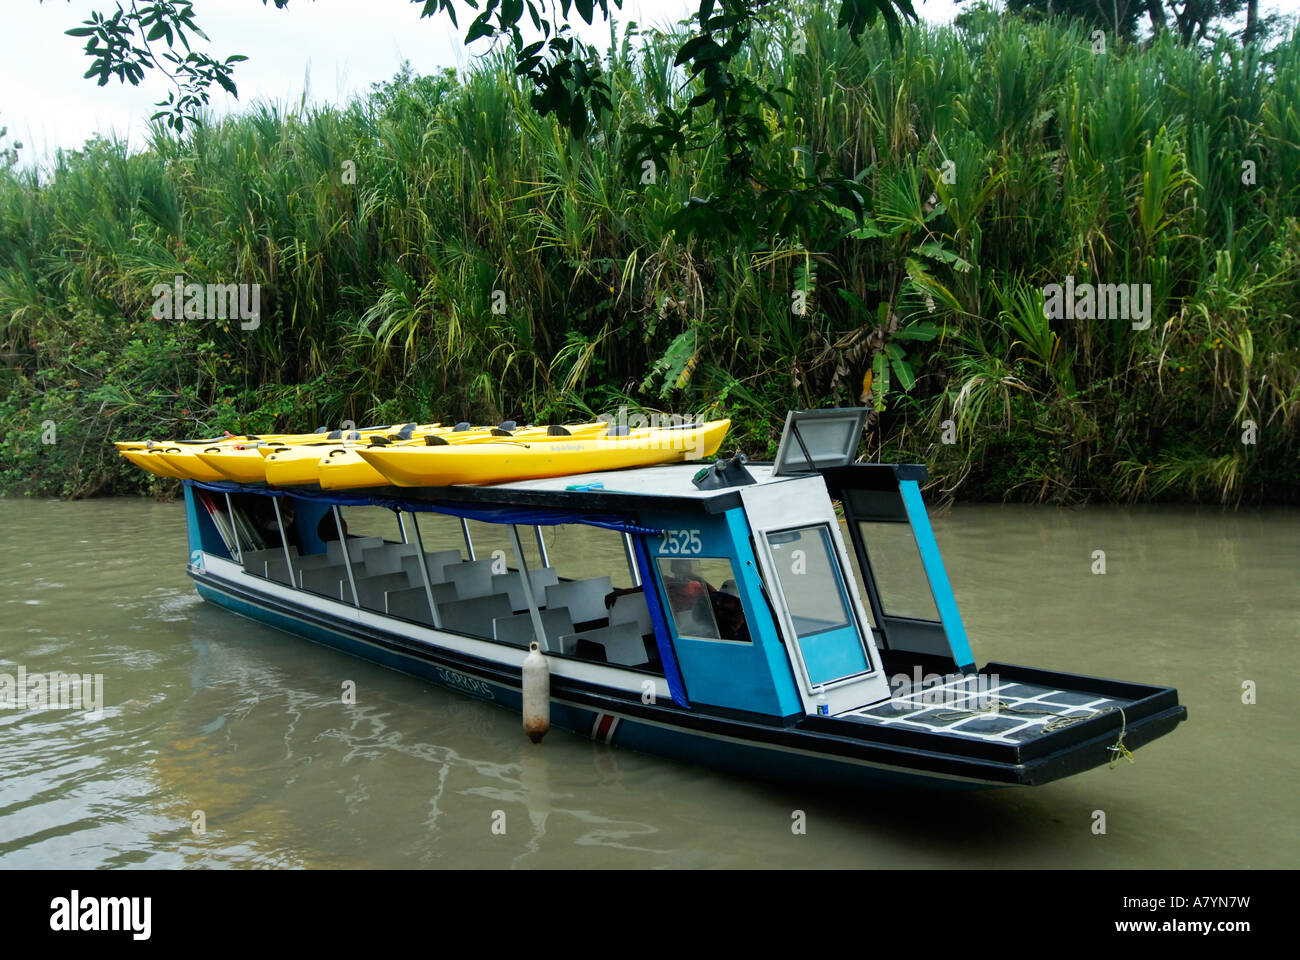 Costa Rica, transporting kayaks by boat Stock Photo